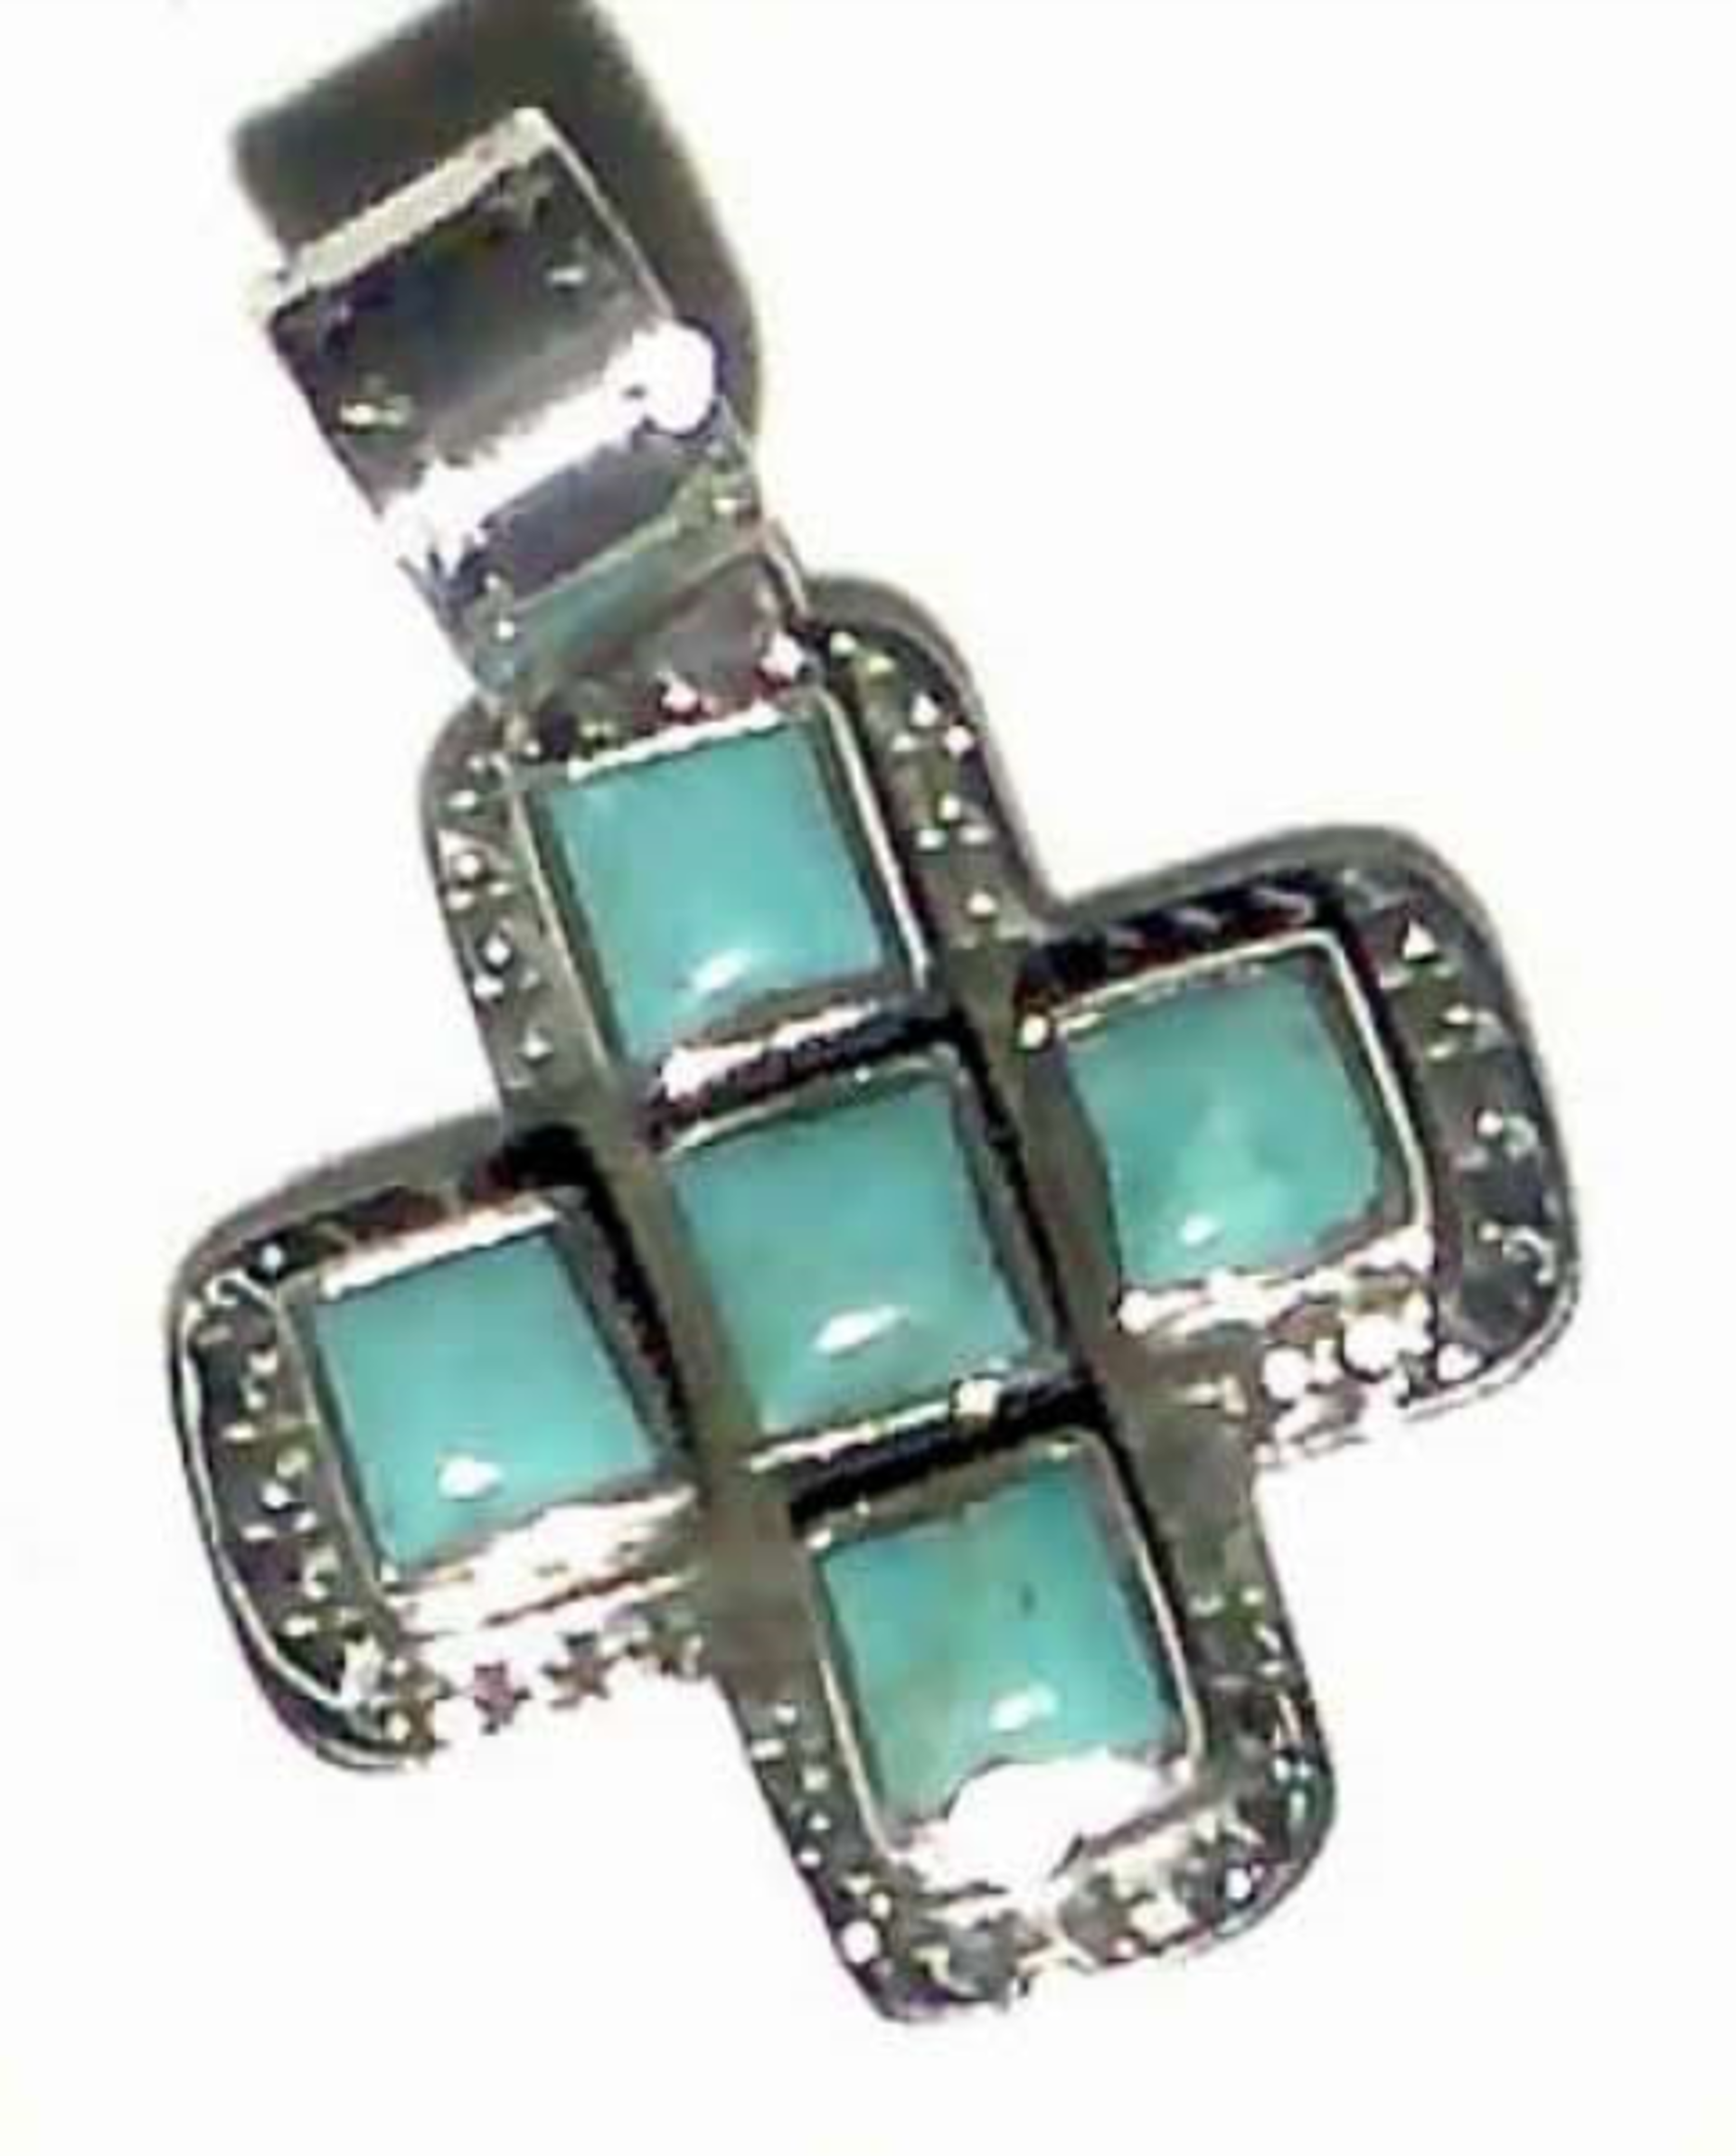 Pendant - Small turquoise square Cross in Sterling Silver by Dan Dodson